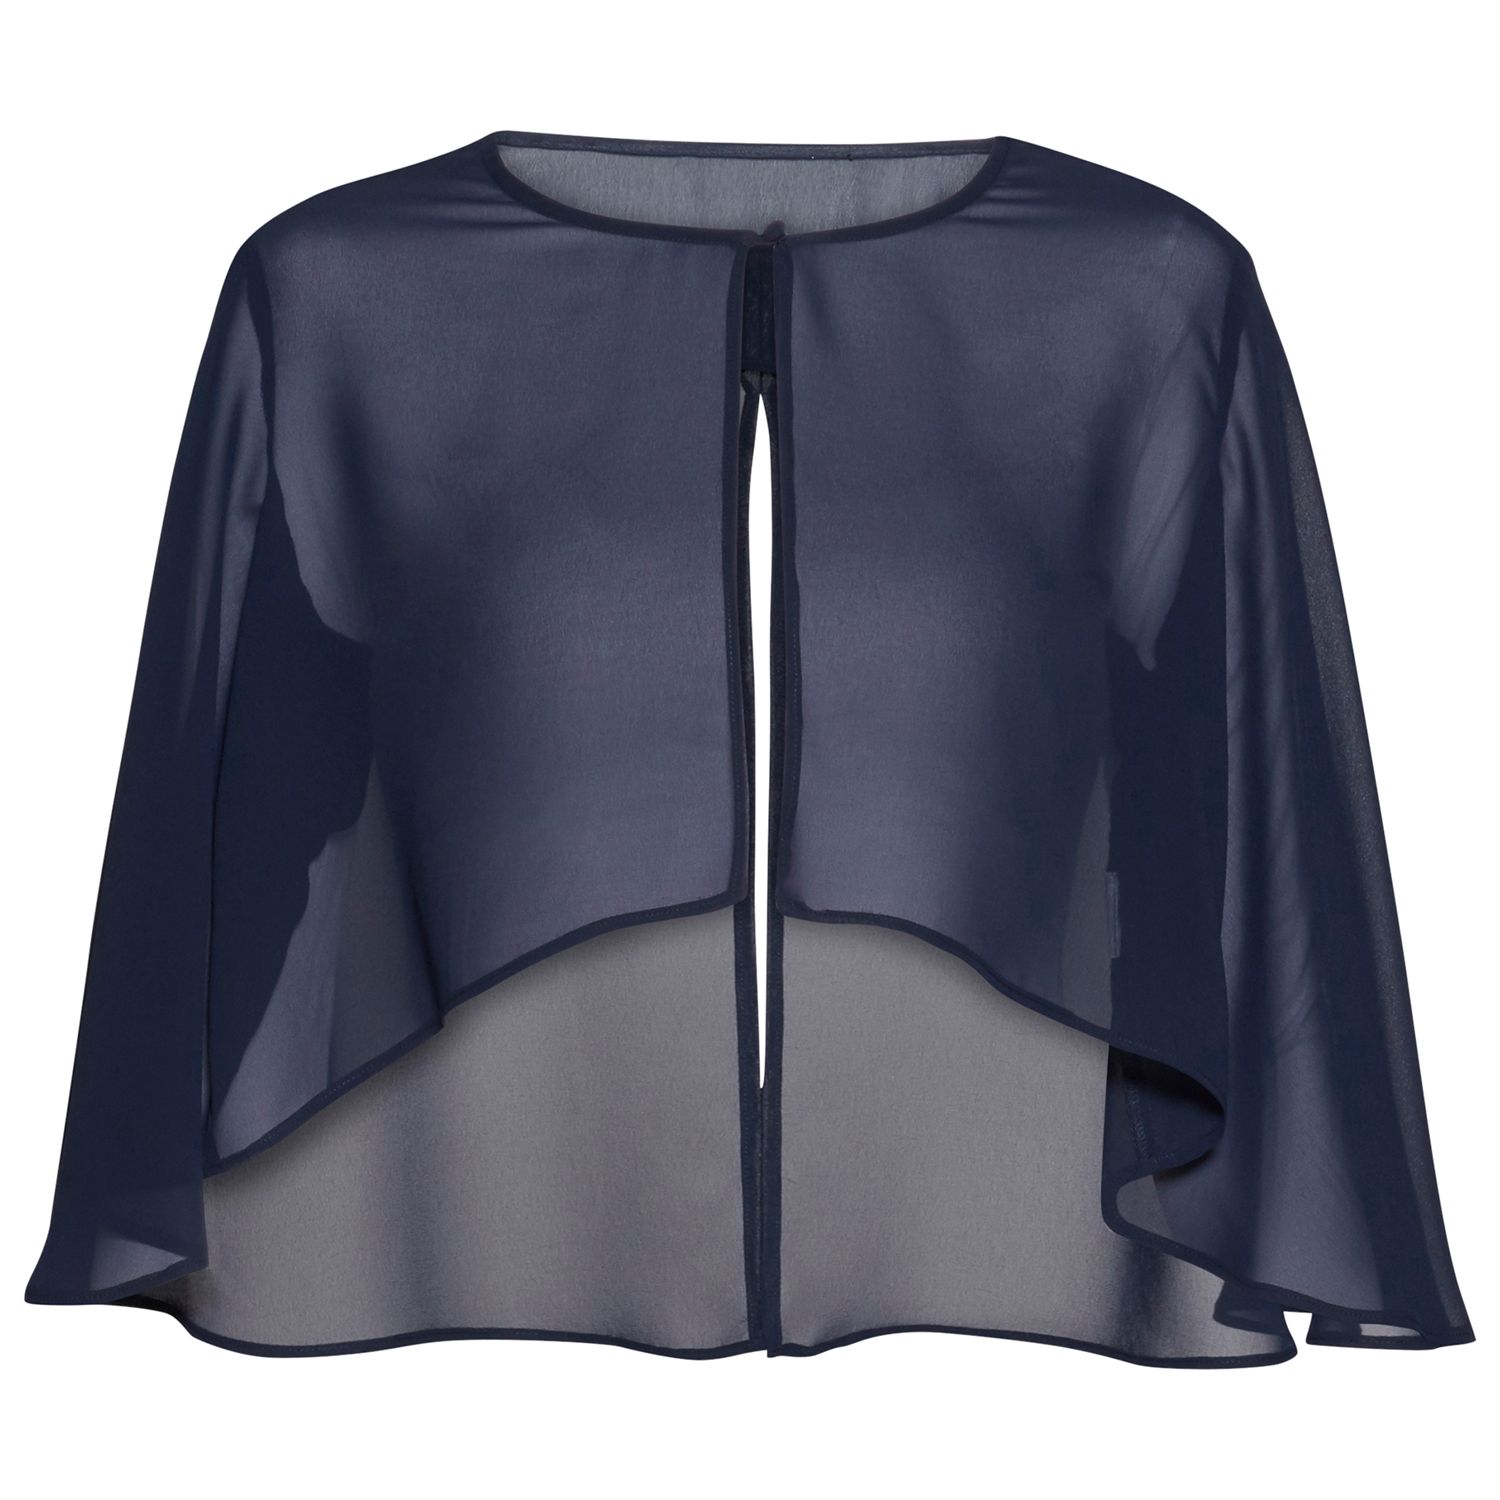 Gina Bacconi Chiffon Cape With Open Back Detail, Spring Navy, 26